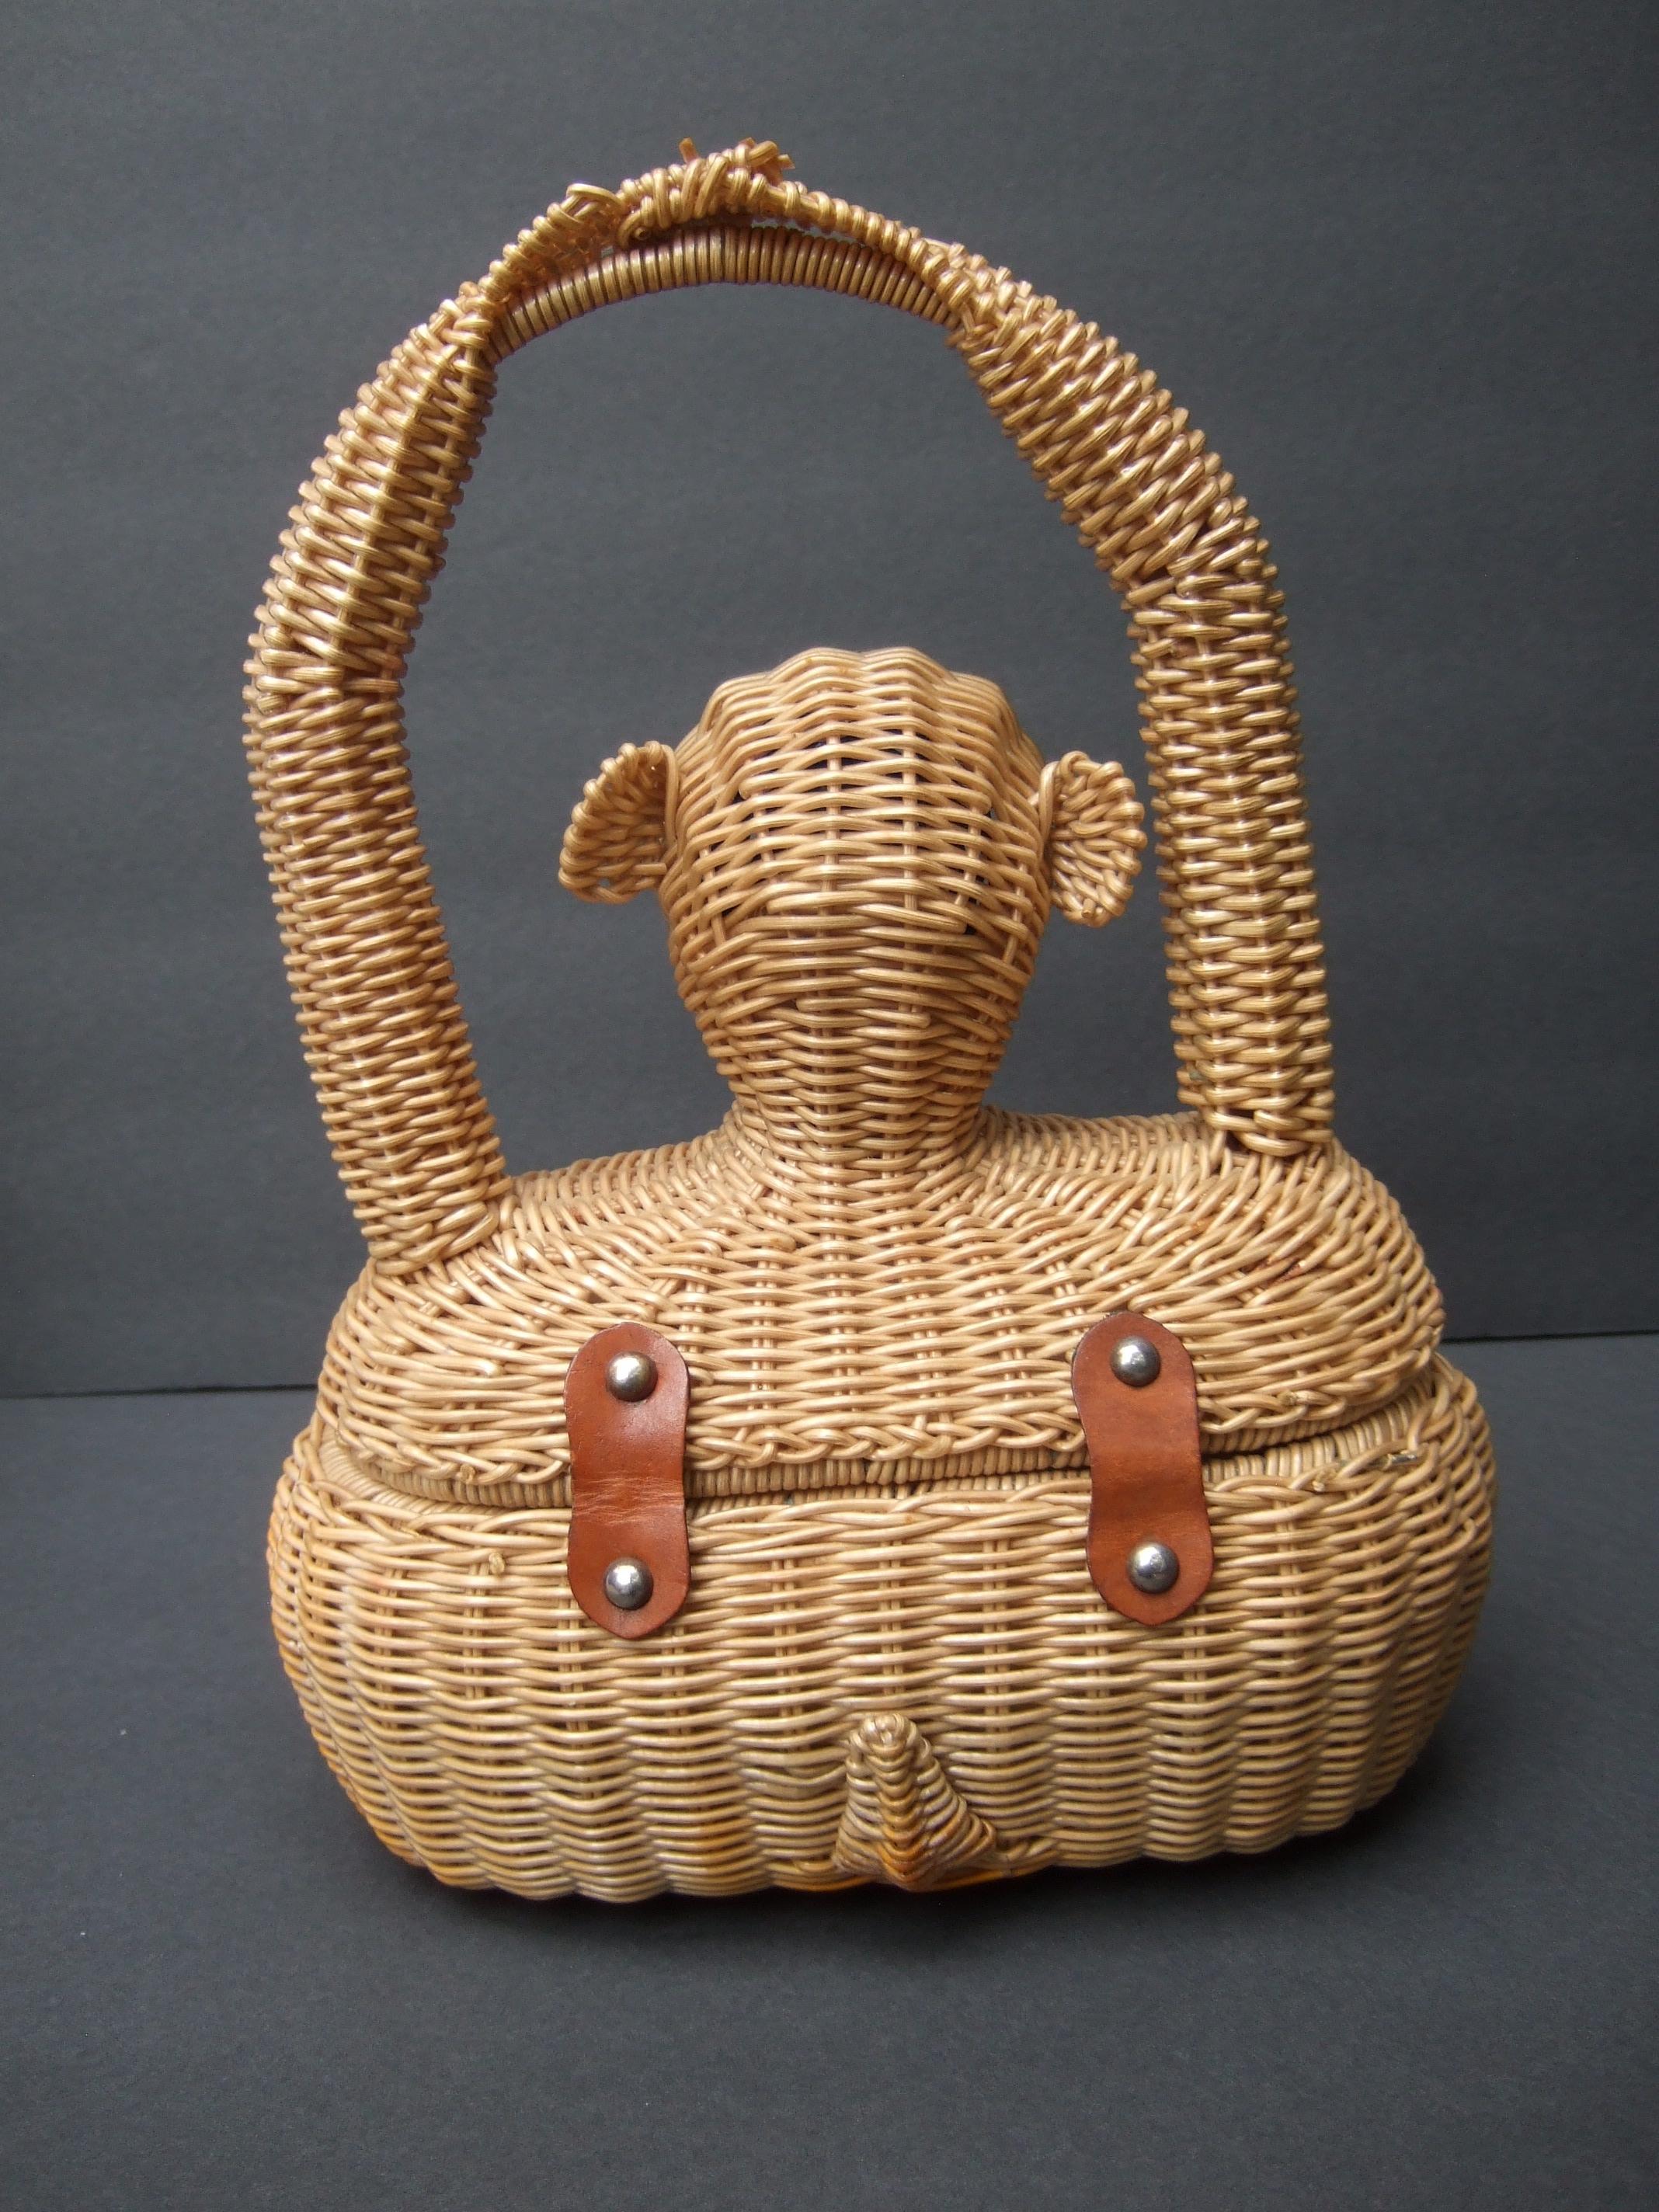 Whimsical Very Rare Wicker Monkey Handbag Designed by Marcus Brothers c 1960 For Sale 13